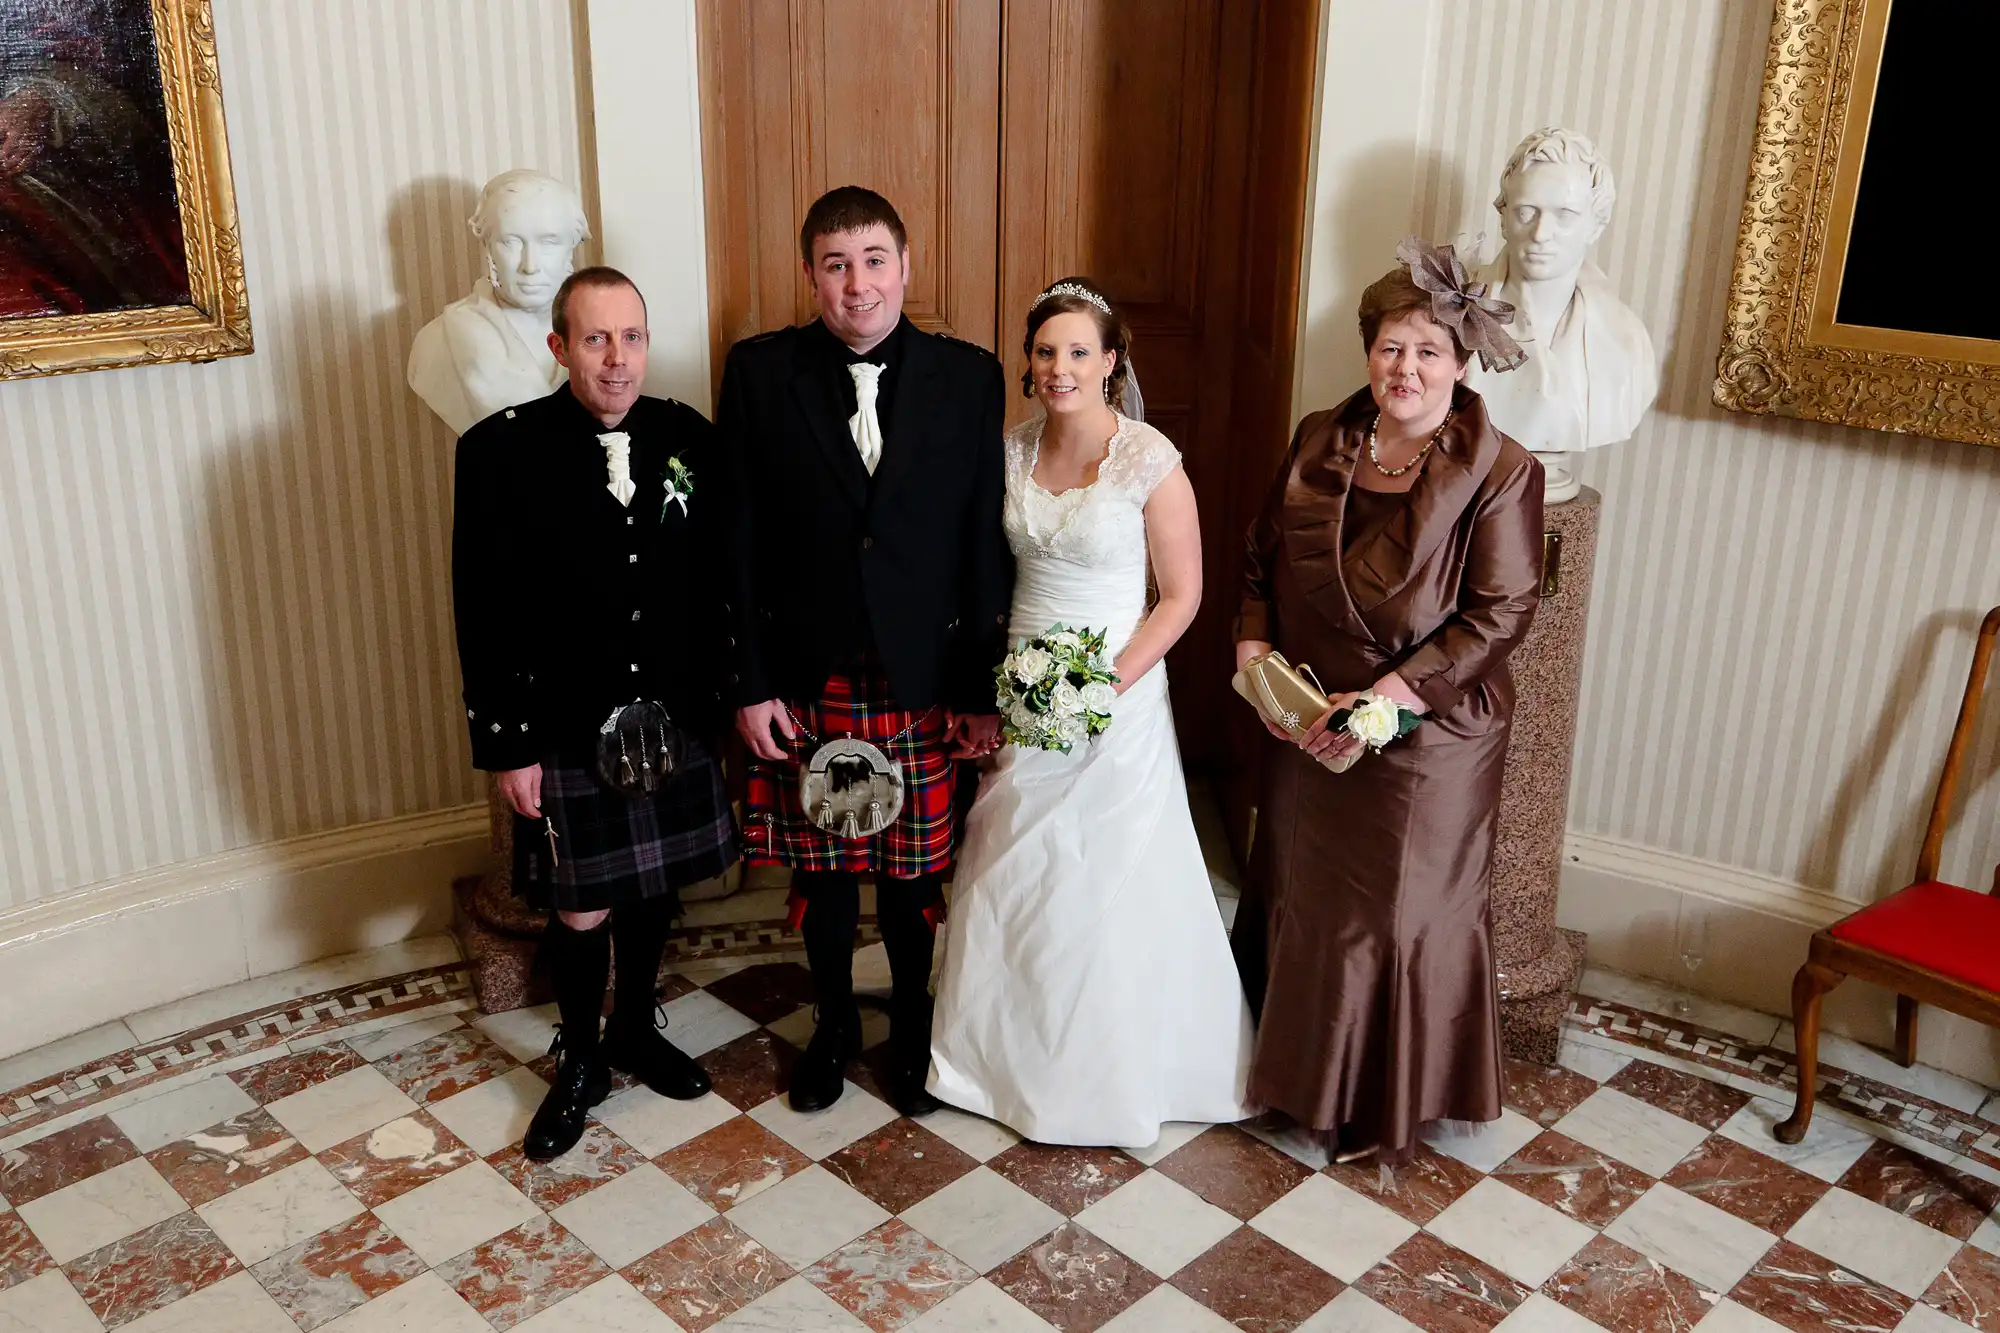 A bride and groom pose with two guests in formal attire, including kilts, in a room with classical busts and a checkered floor.